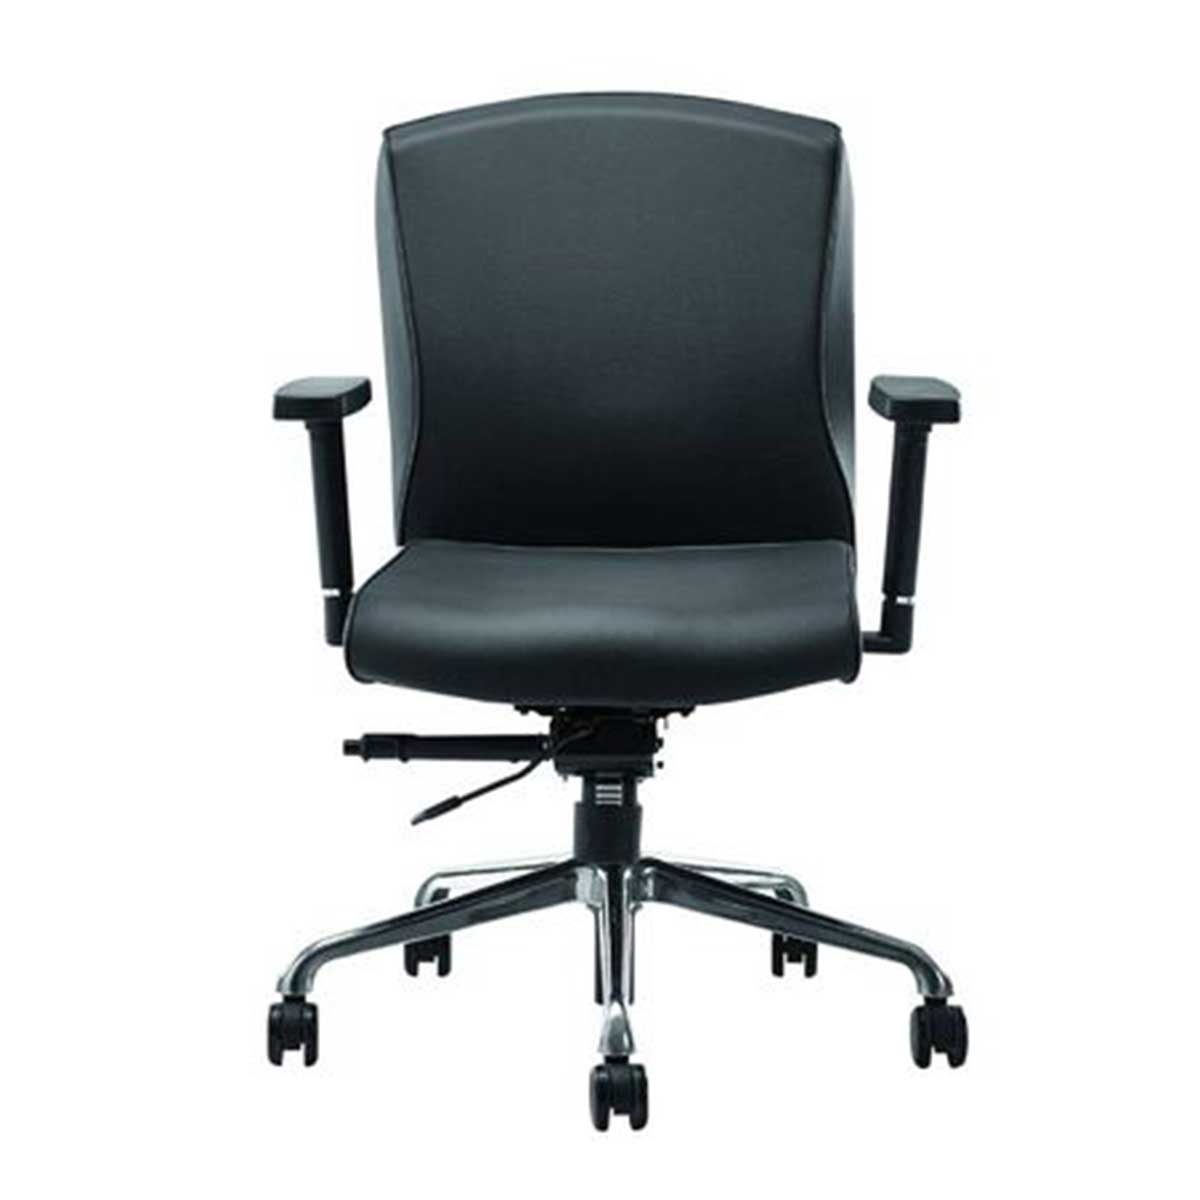 Low Back Office Chair Manufacturers, Suppliers in Sultanpuri